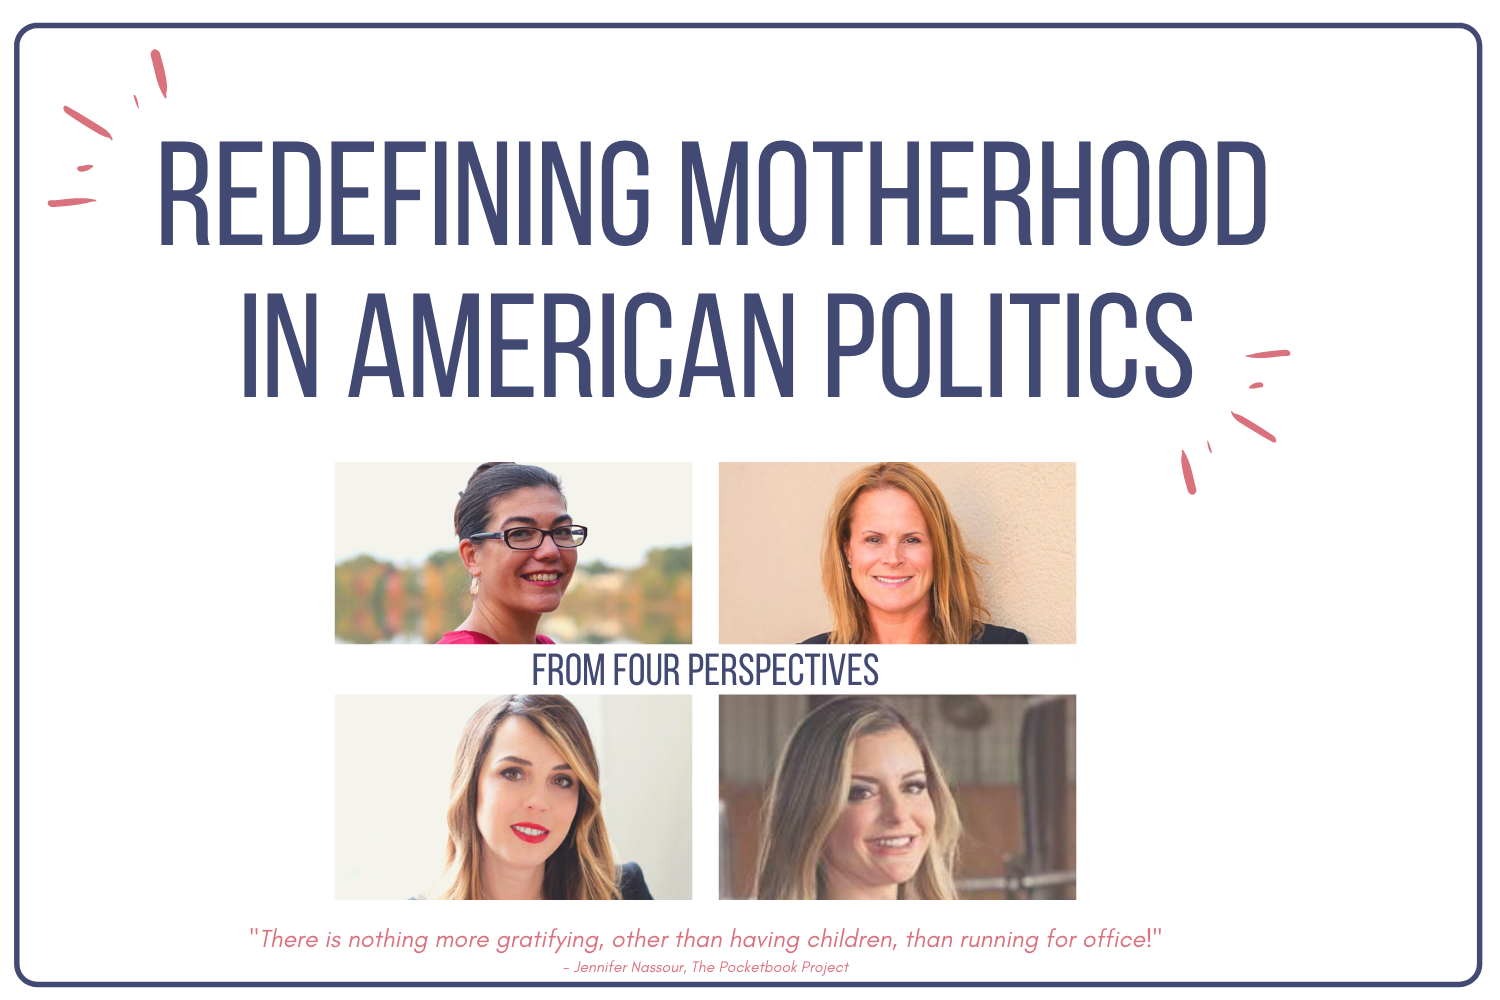 Redefining Motherhood in American Politics: Four Perspectives